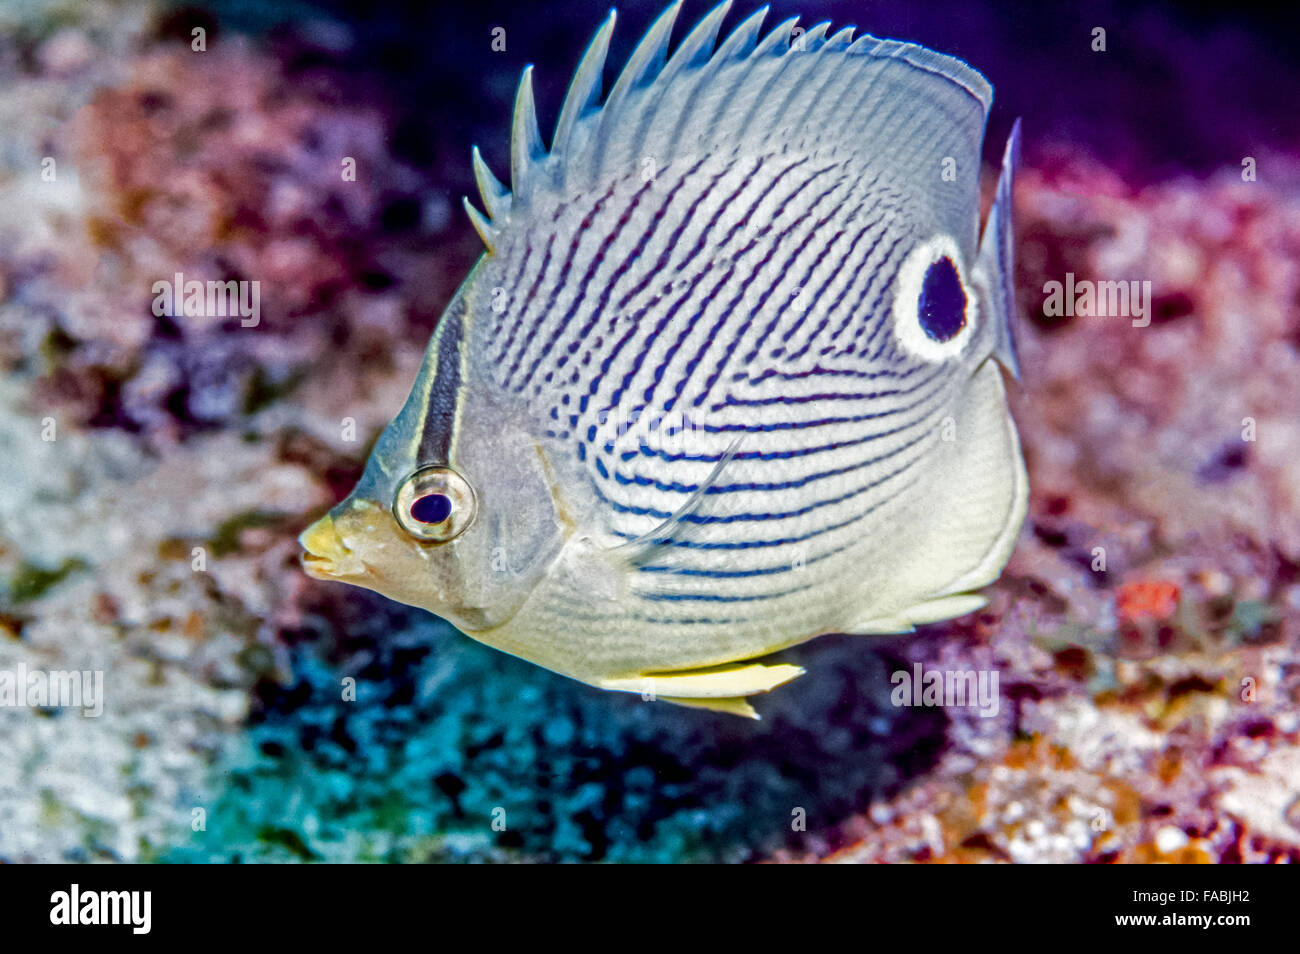 foureye butterflyfish (Chaetodon capistratus) is a butterflyfish,family Chaetodontidae. It is alternatively called the four-eyed Stock Photo